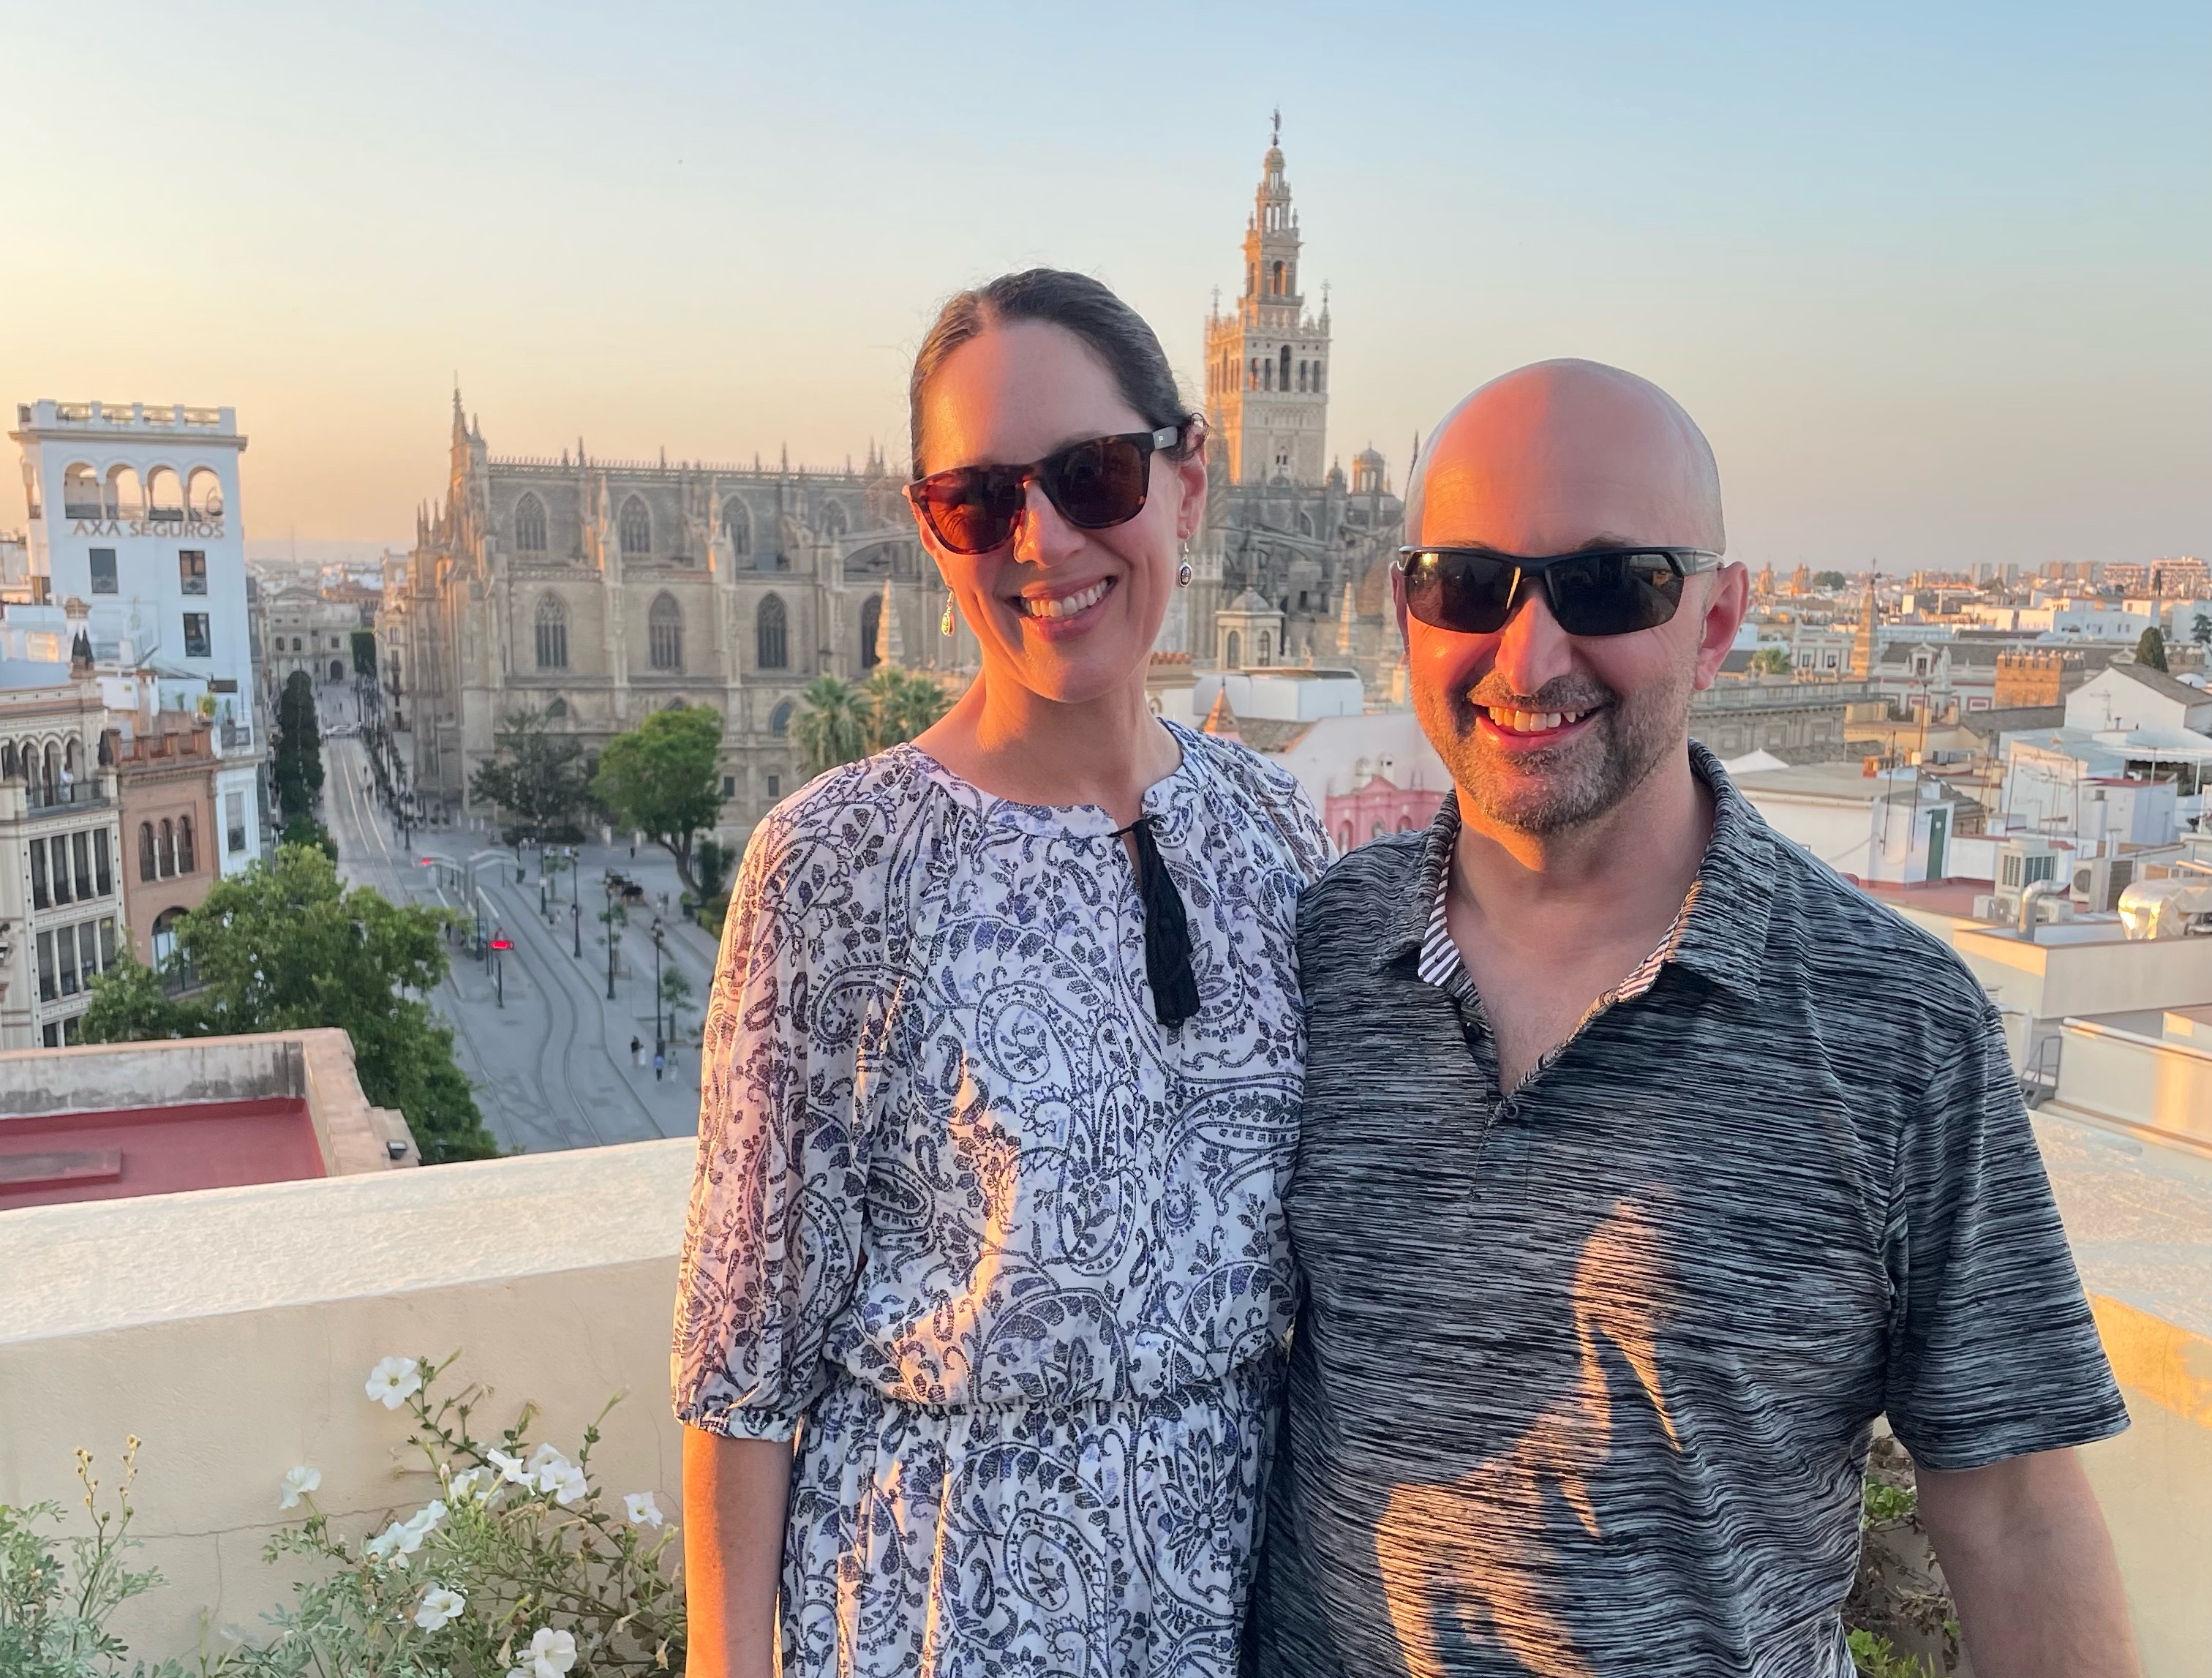 My wife Julie and I participated in a rooftop paella-cooking class during our time in Sevilla, Spain, last month. In the background is the Catedral de Sevilla. This photo was taken with Julie's iPhone 12 after I lost mine.